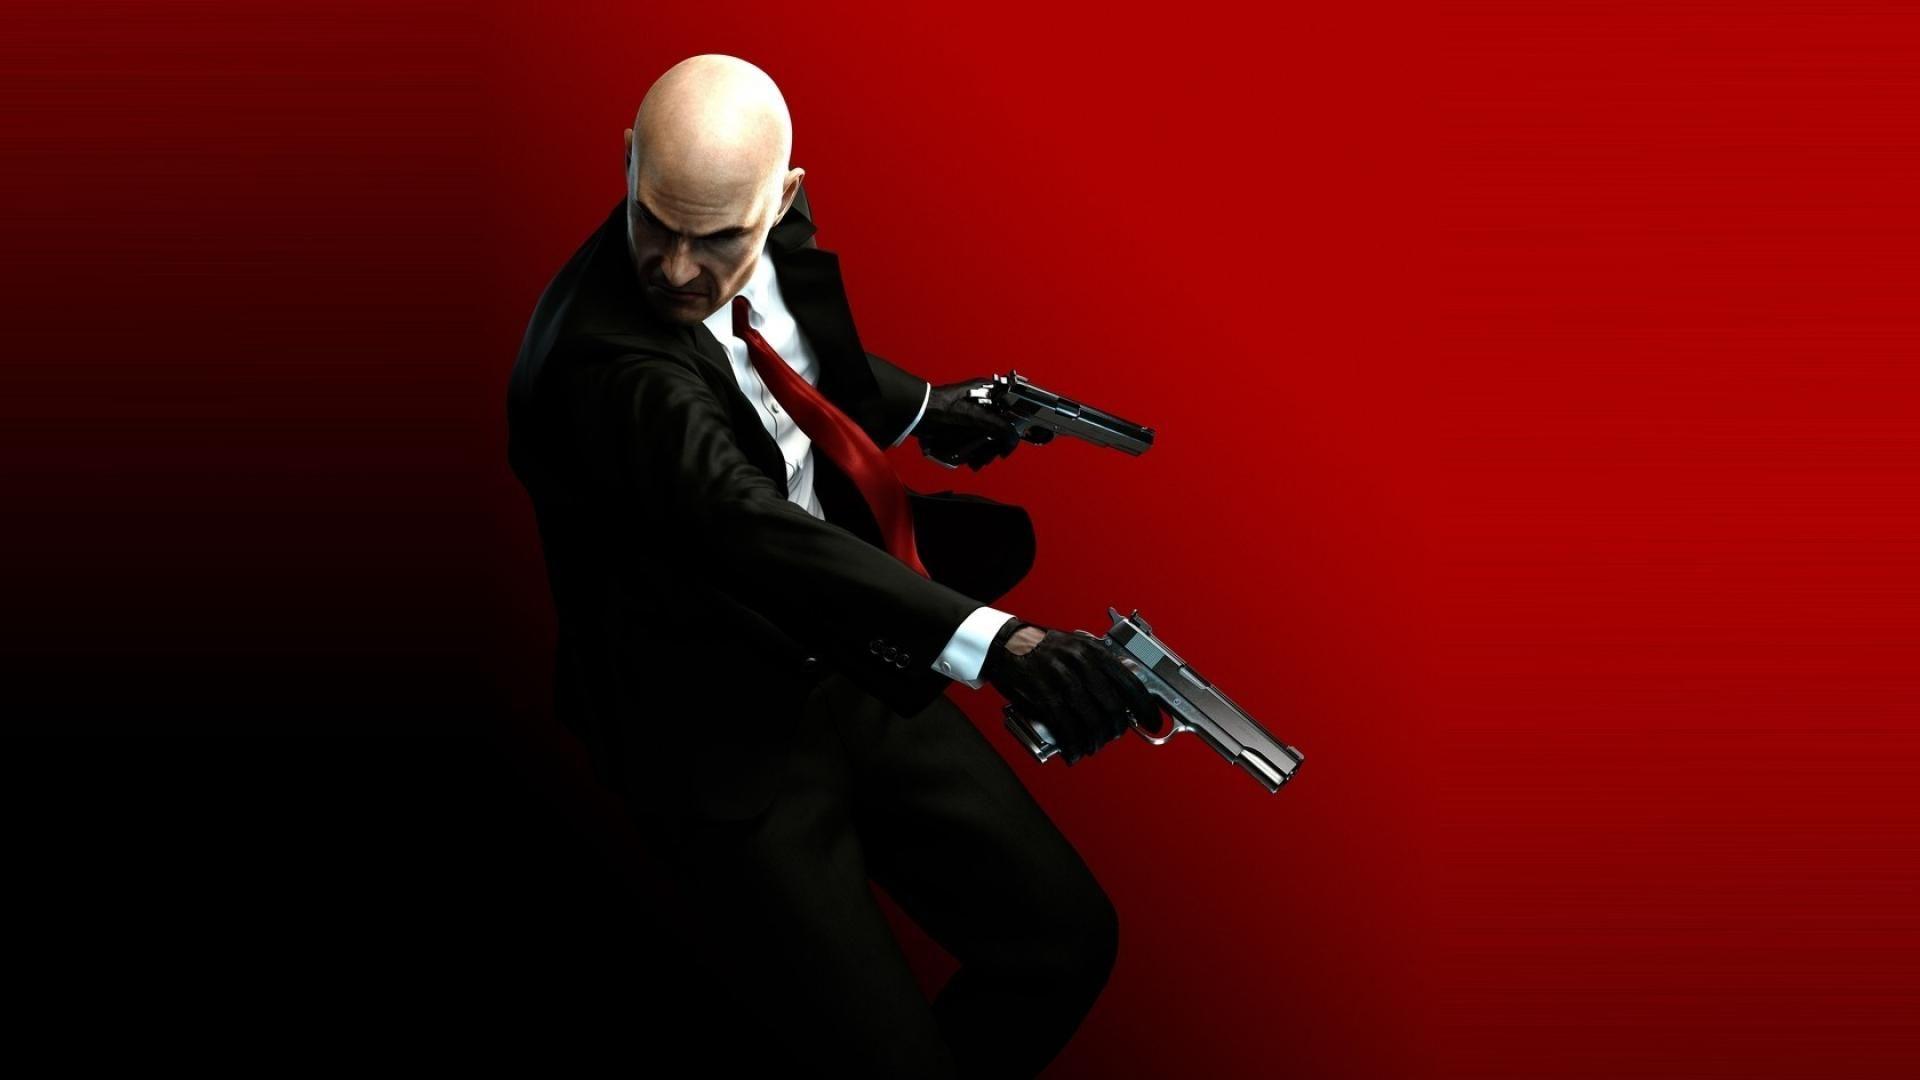 Hitman Agent 47 Wallpapers Top Free Hitman Agent 47 Backgrounds Wallpaperaccess